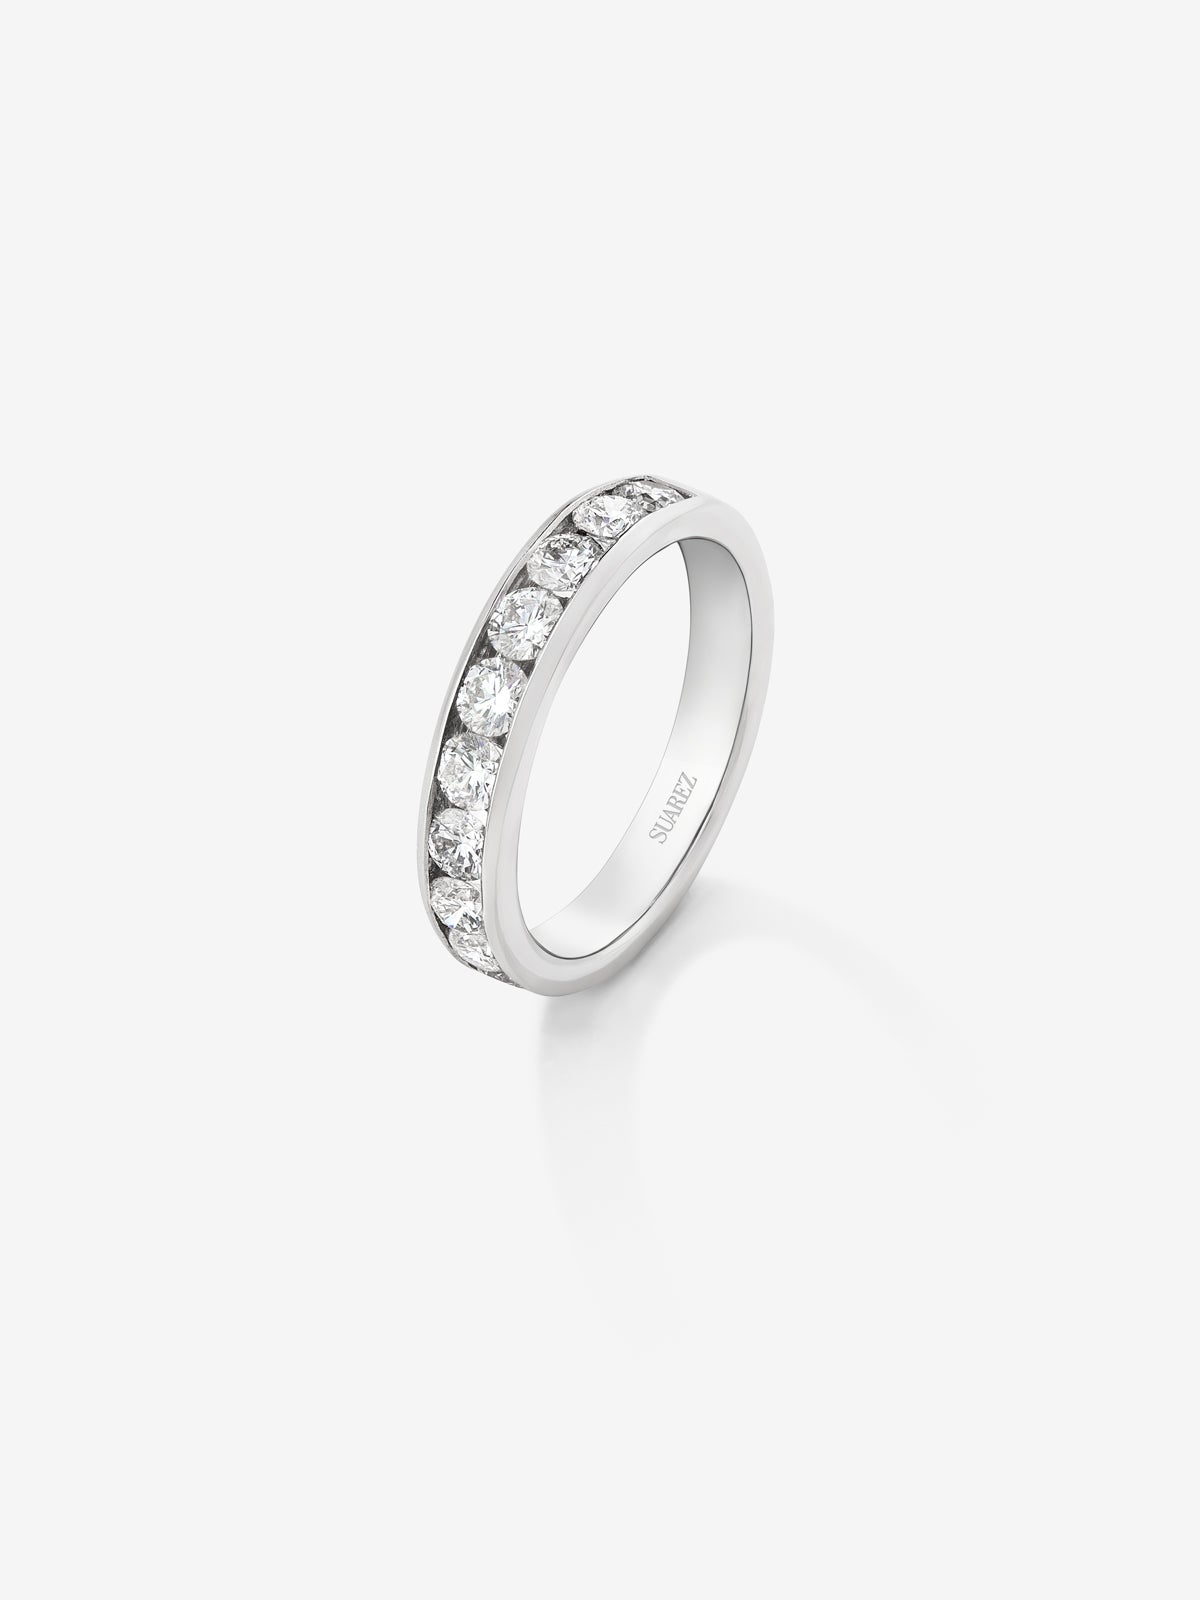 Half ring in 18K white gold with 12 brilliant-cut diamonds with a total of 0.84 cts